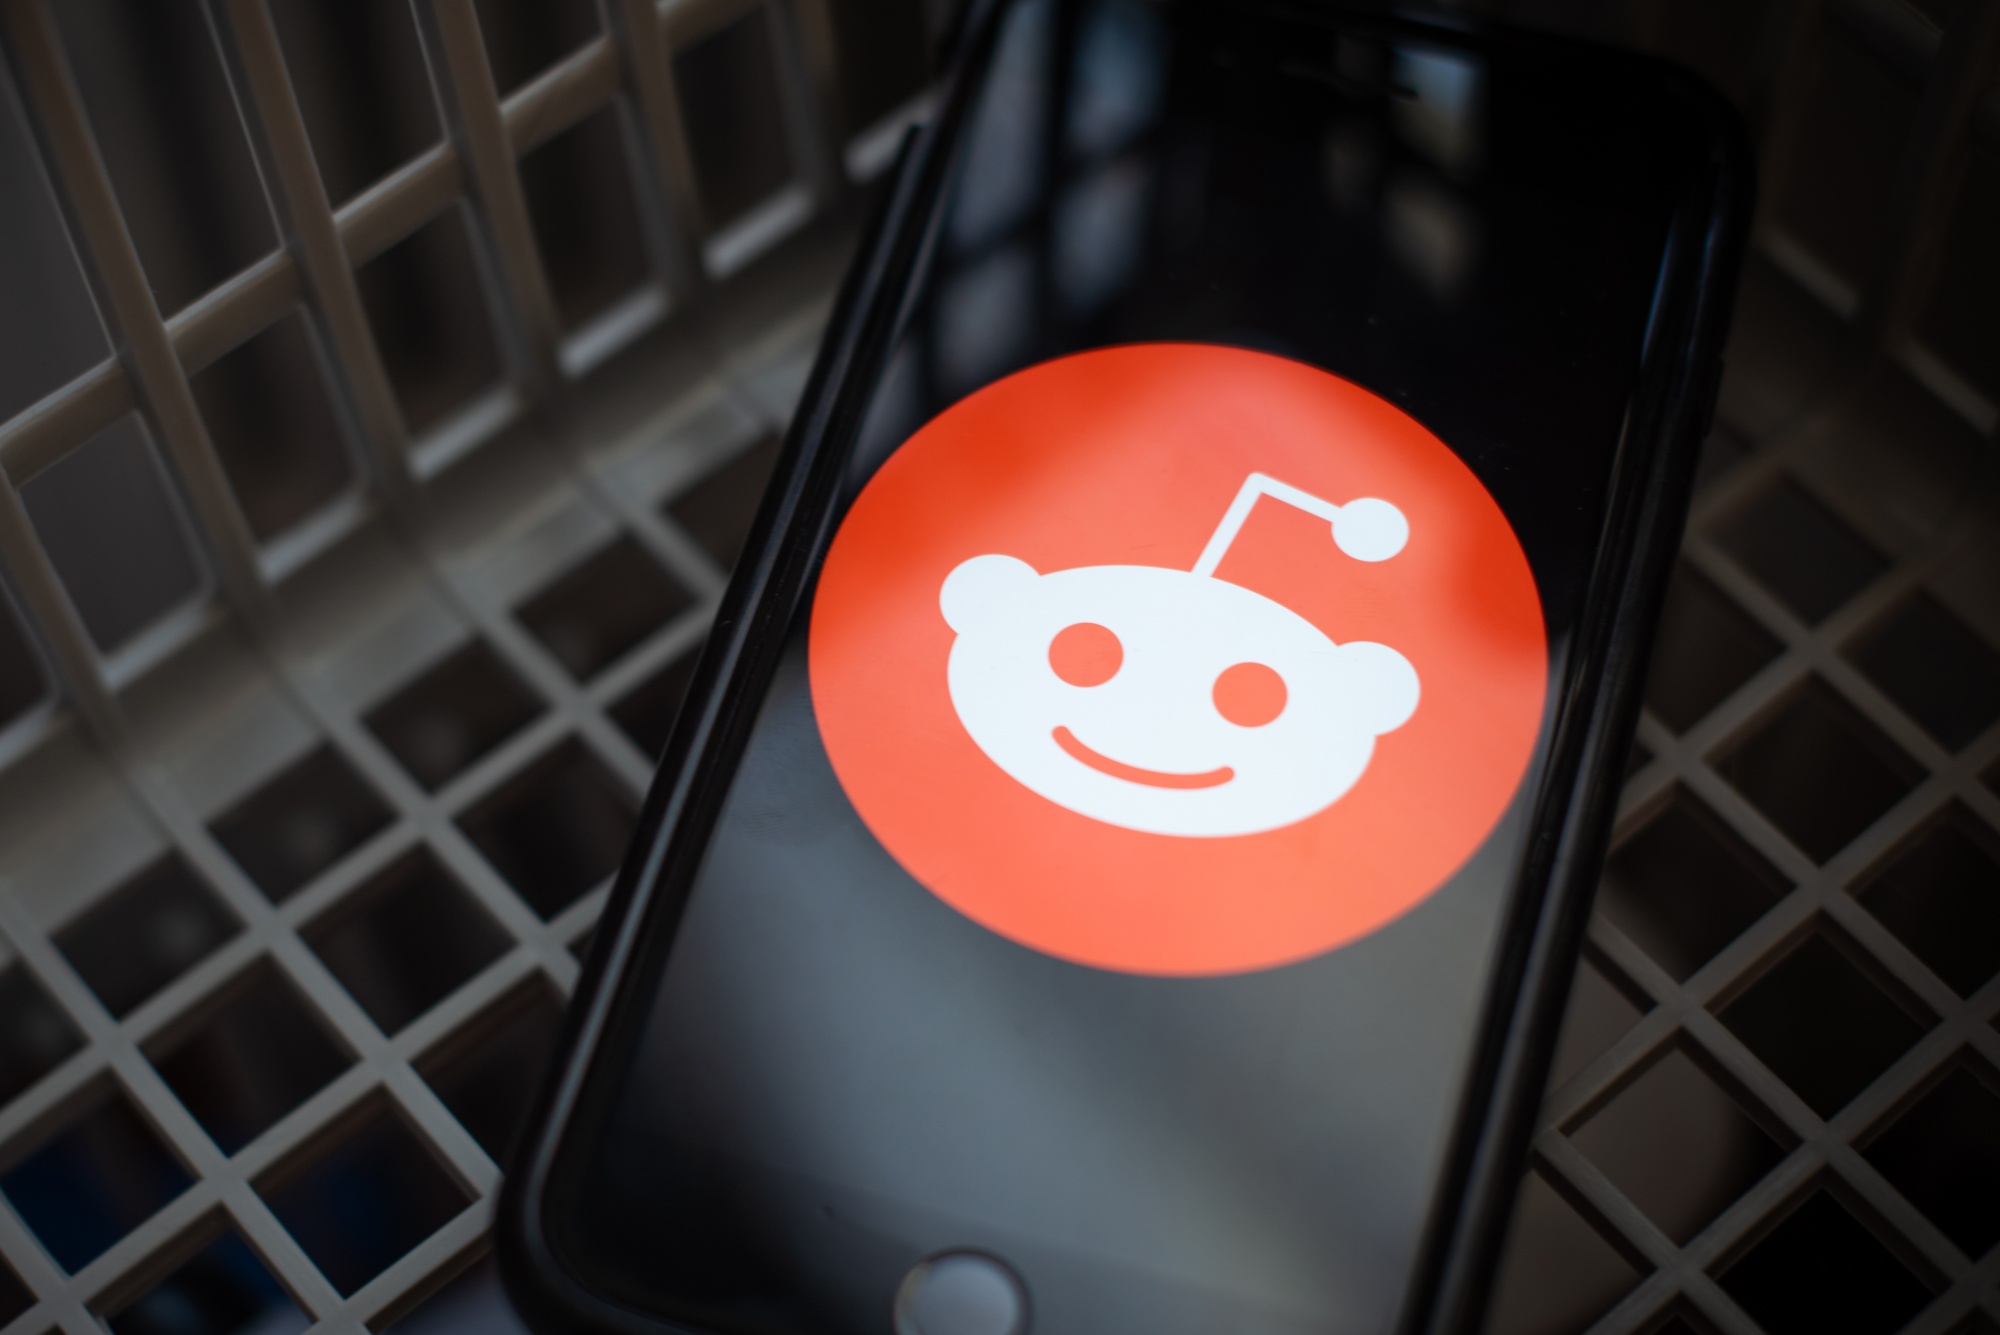 Reddit on New Pricing Plan Company Needs to Be Fairly Paid